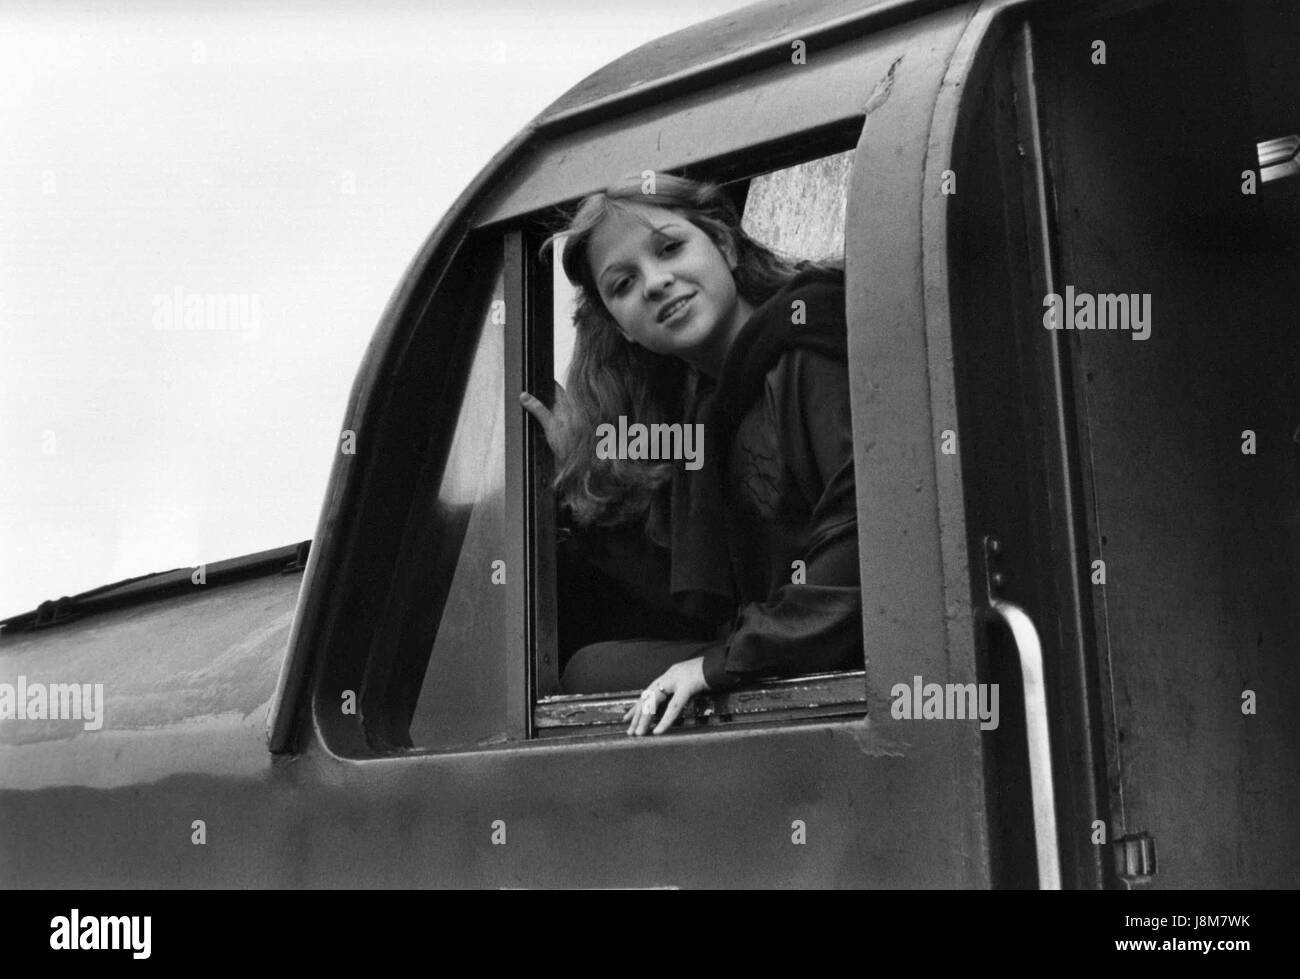 Rachel Sweet, U.S. pop singer, in the cab of a diesel locomotive at Edinburgh in Scotland on October 27, 1978. She was on the Be Stiff tour run by her label Stiff Records. Stock Photo